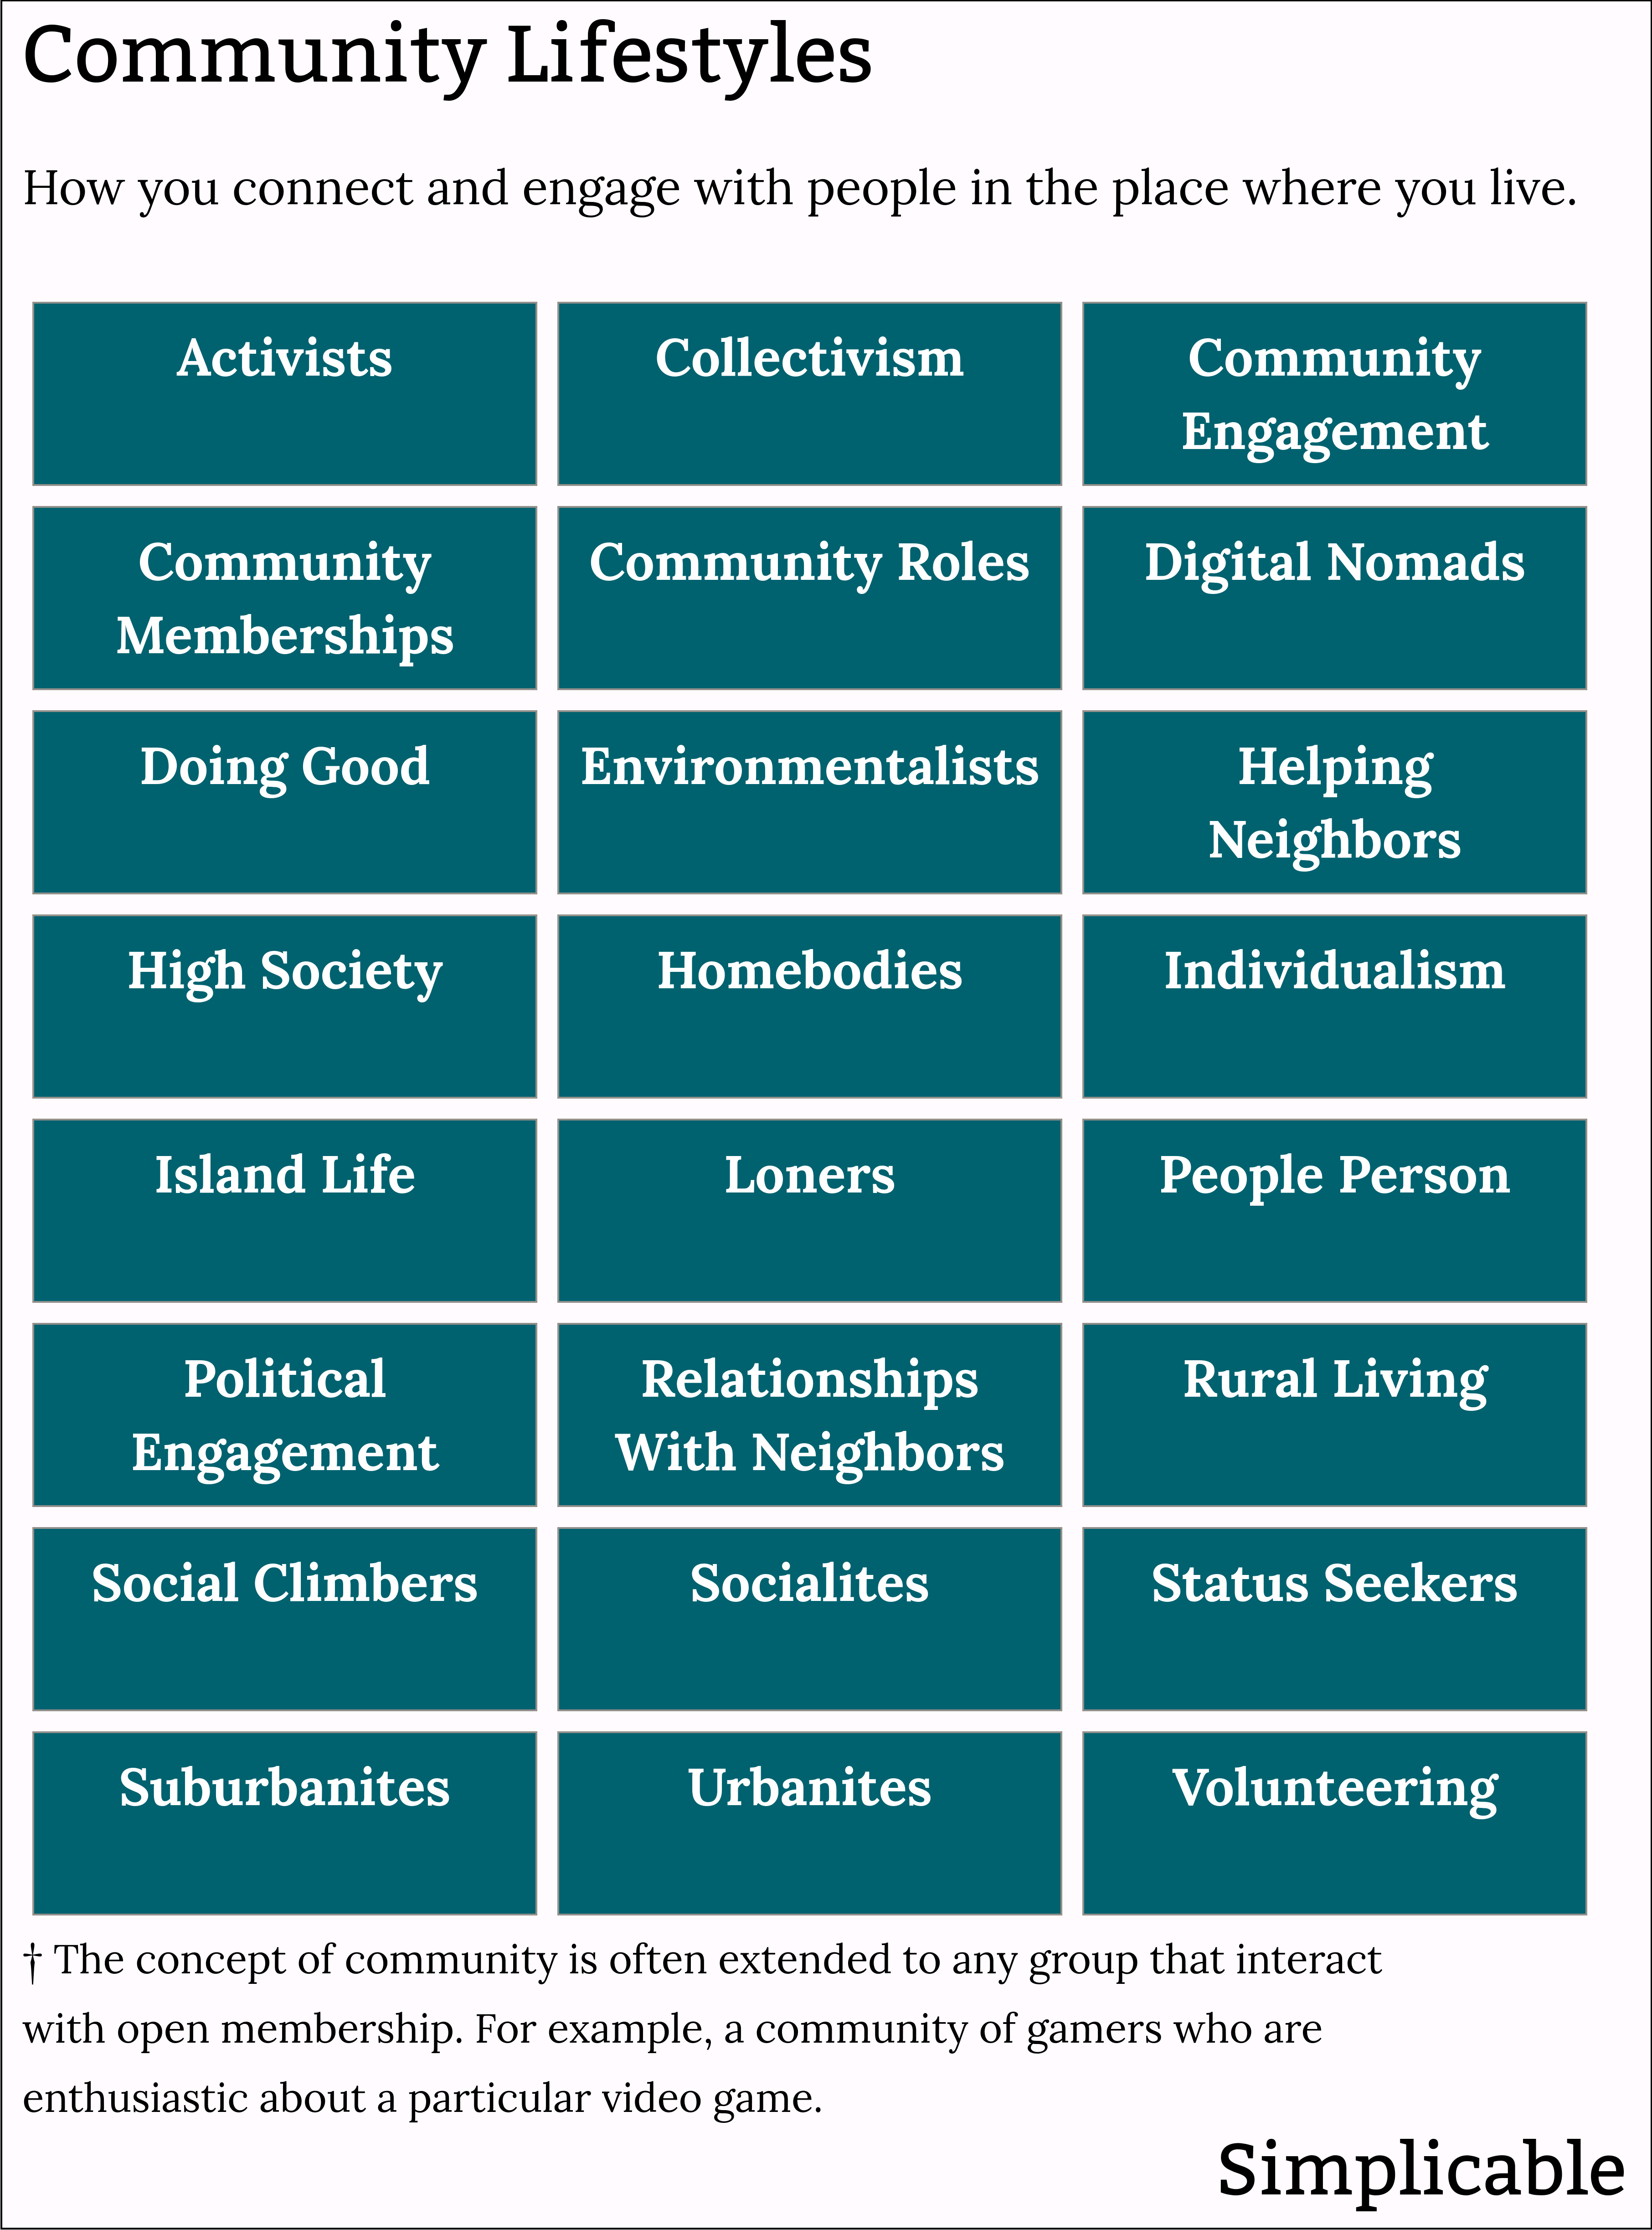 examples of community lifestyles